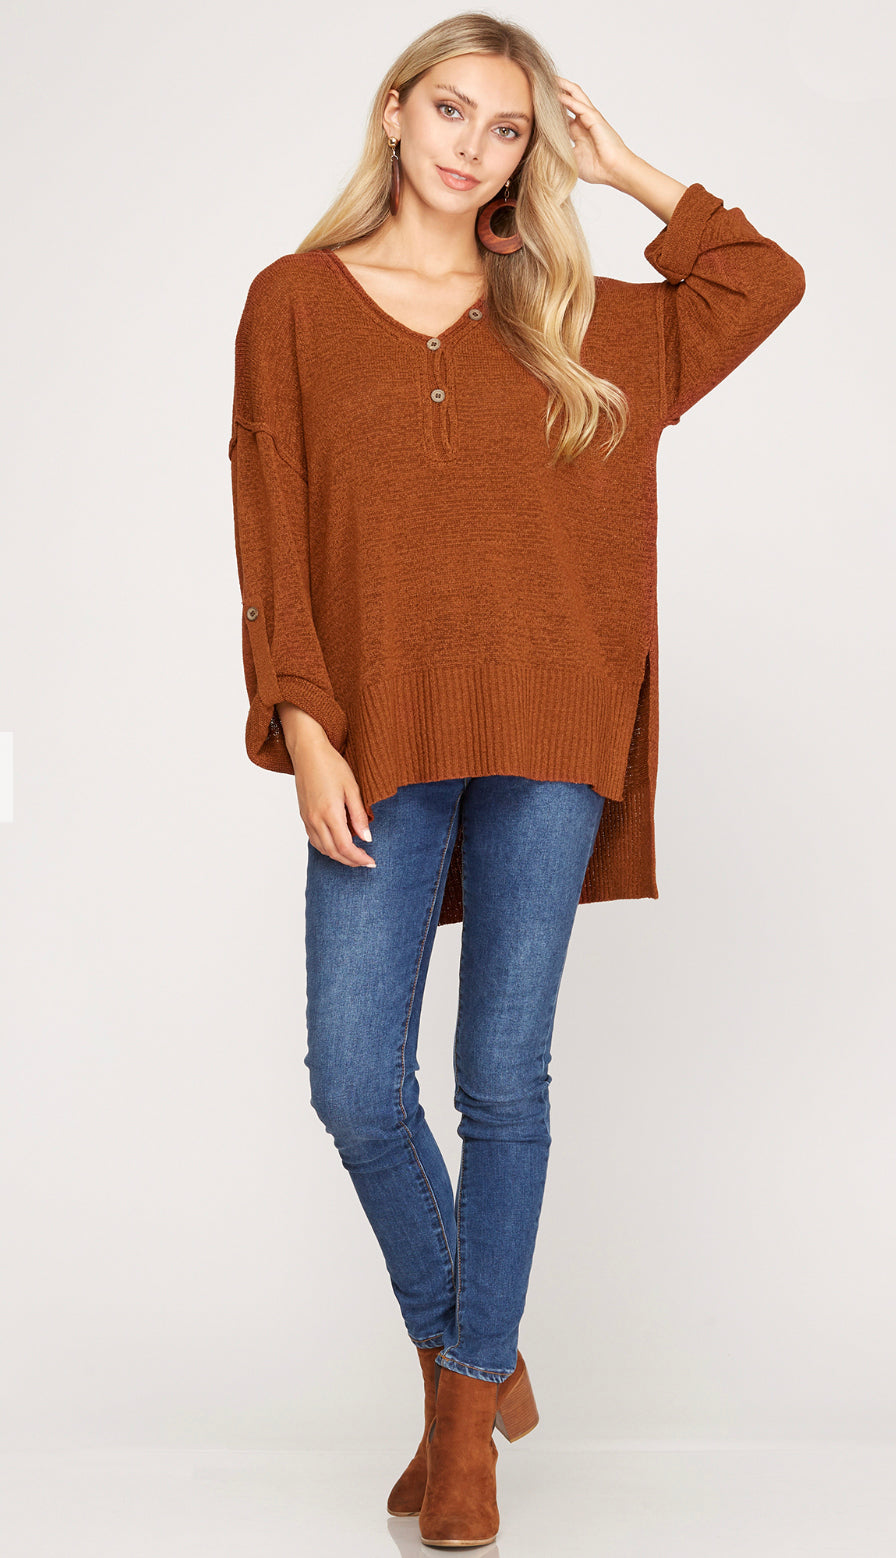 Roll Up Sleeve Button Sweater- Taupe